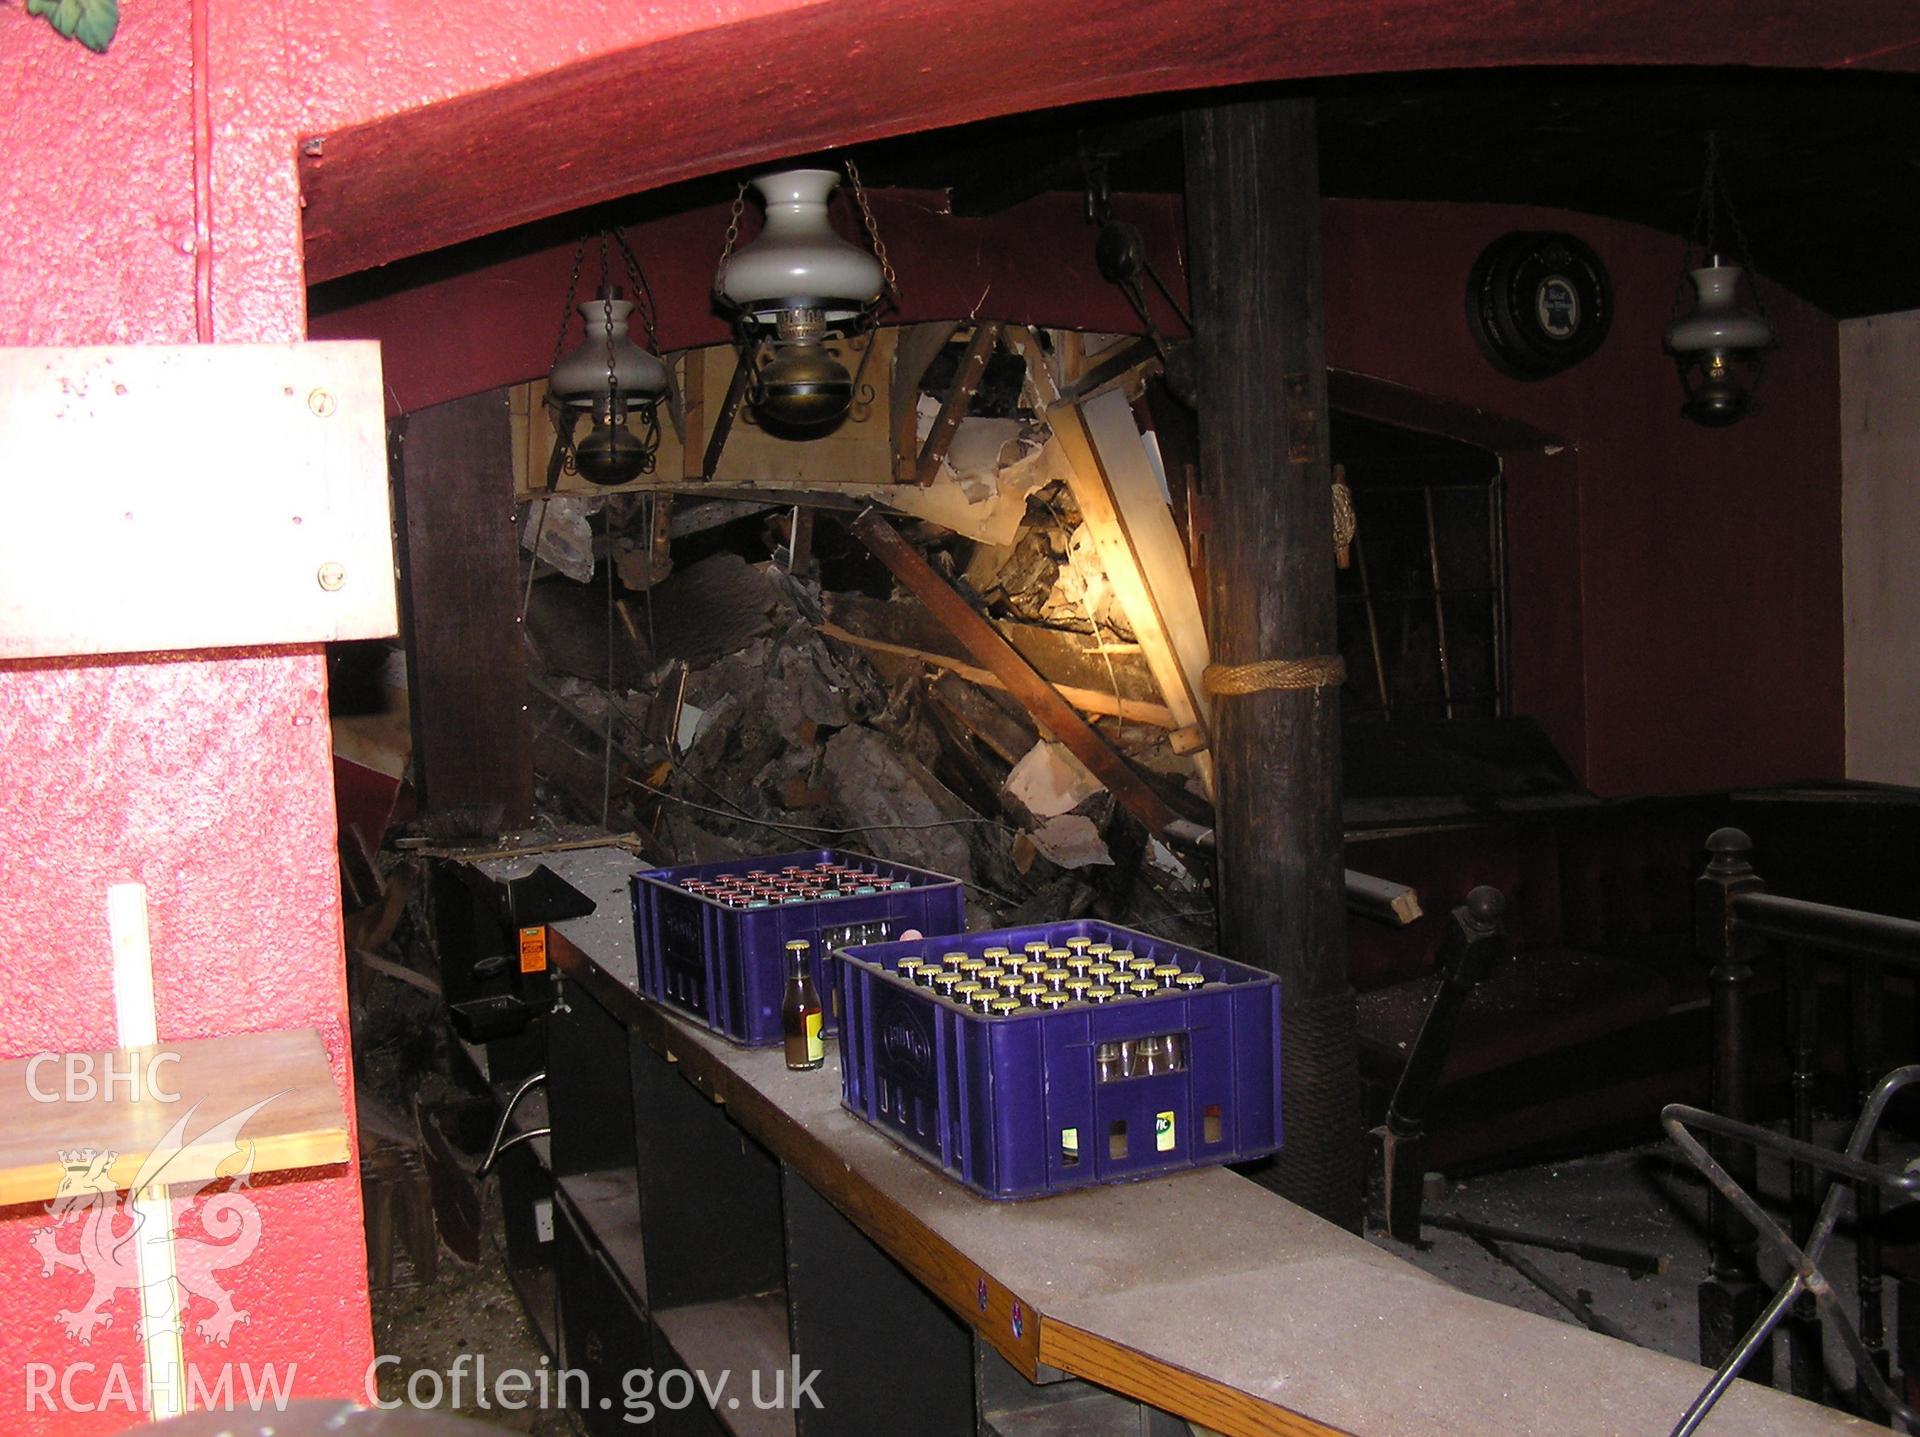 Colour digital photograph showing the damage caused by fire to the interior of the Royal Gatehouse Hotel.